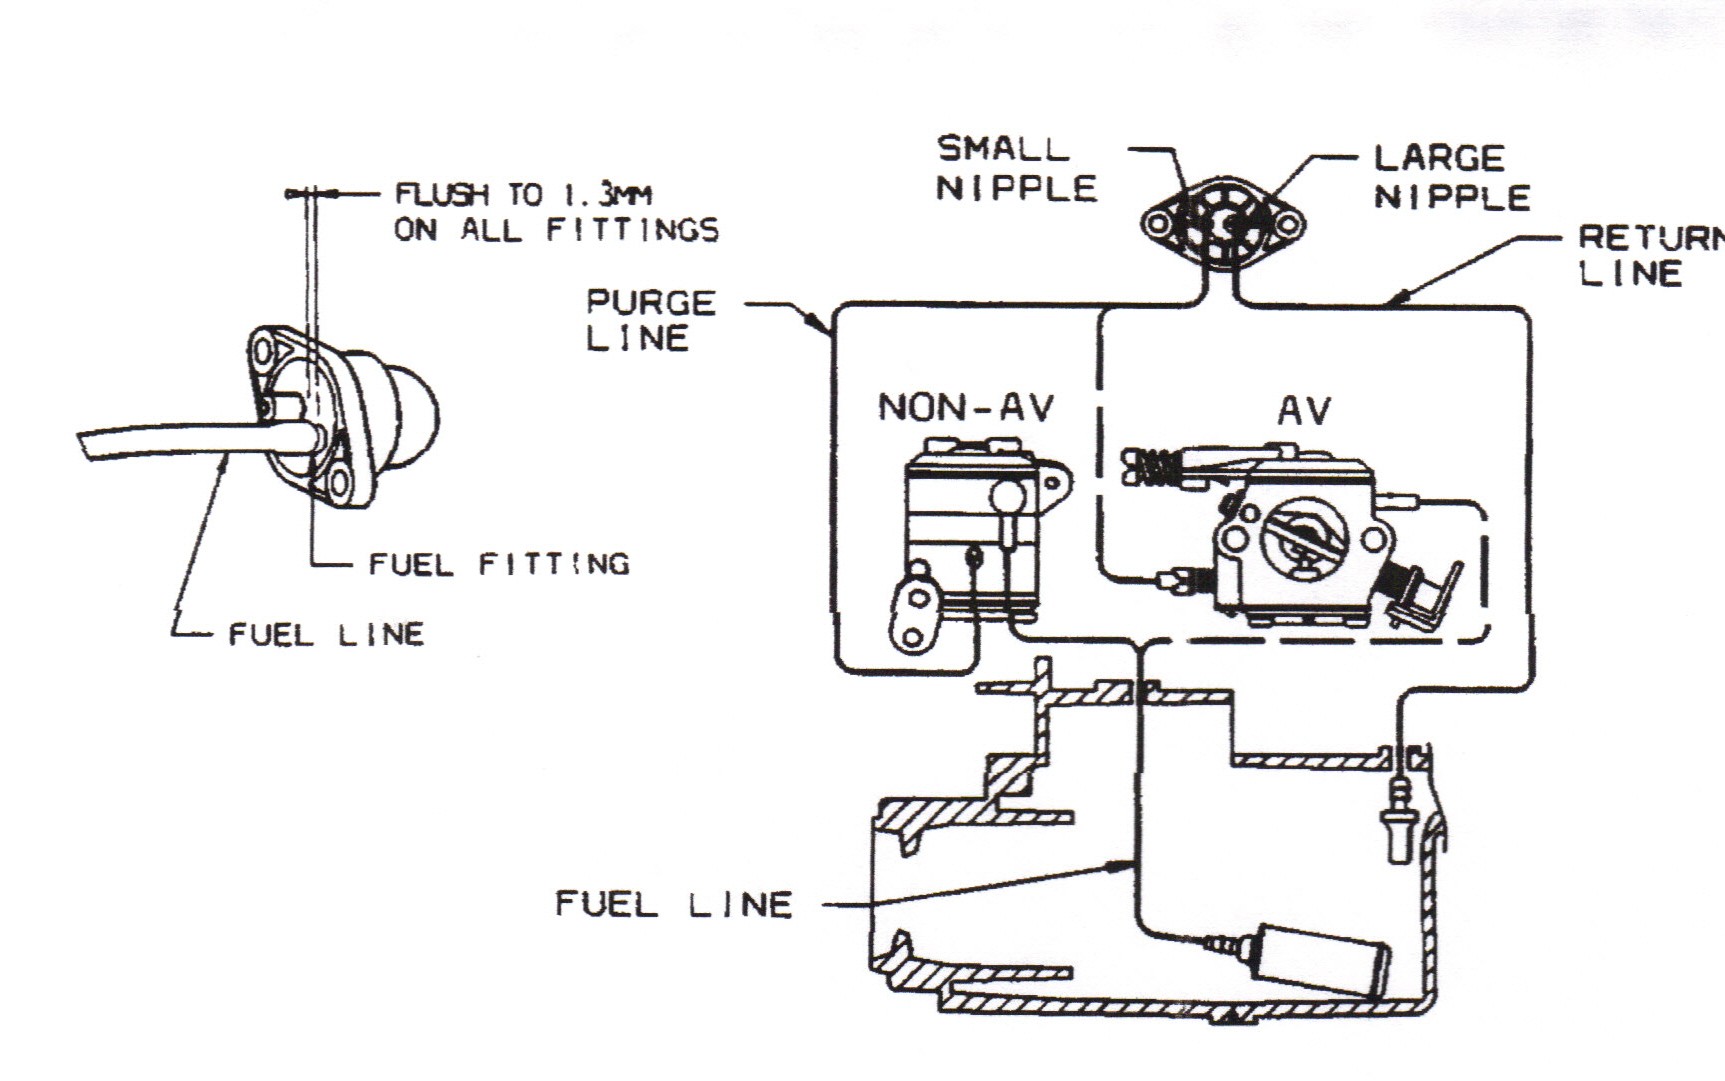 Diagram Weed Eater Fuel Line Replacement Diagram Green Machine Weed Eater Parts Weed Eater e Wiring Diagram